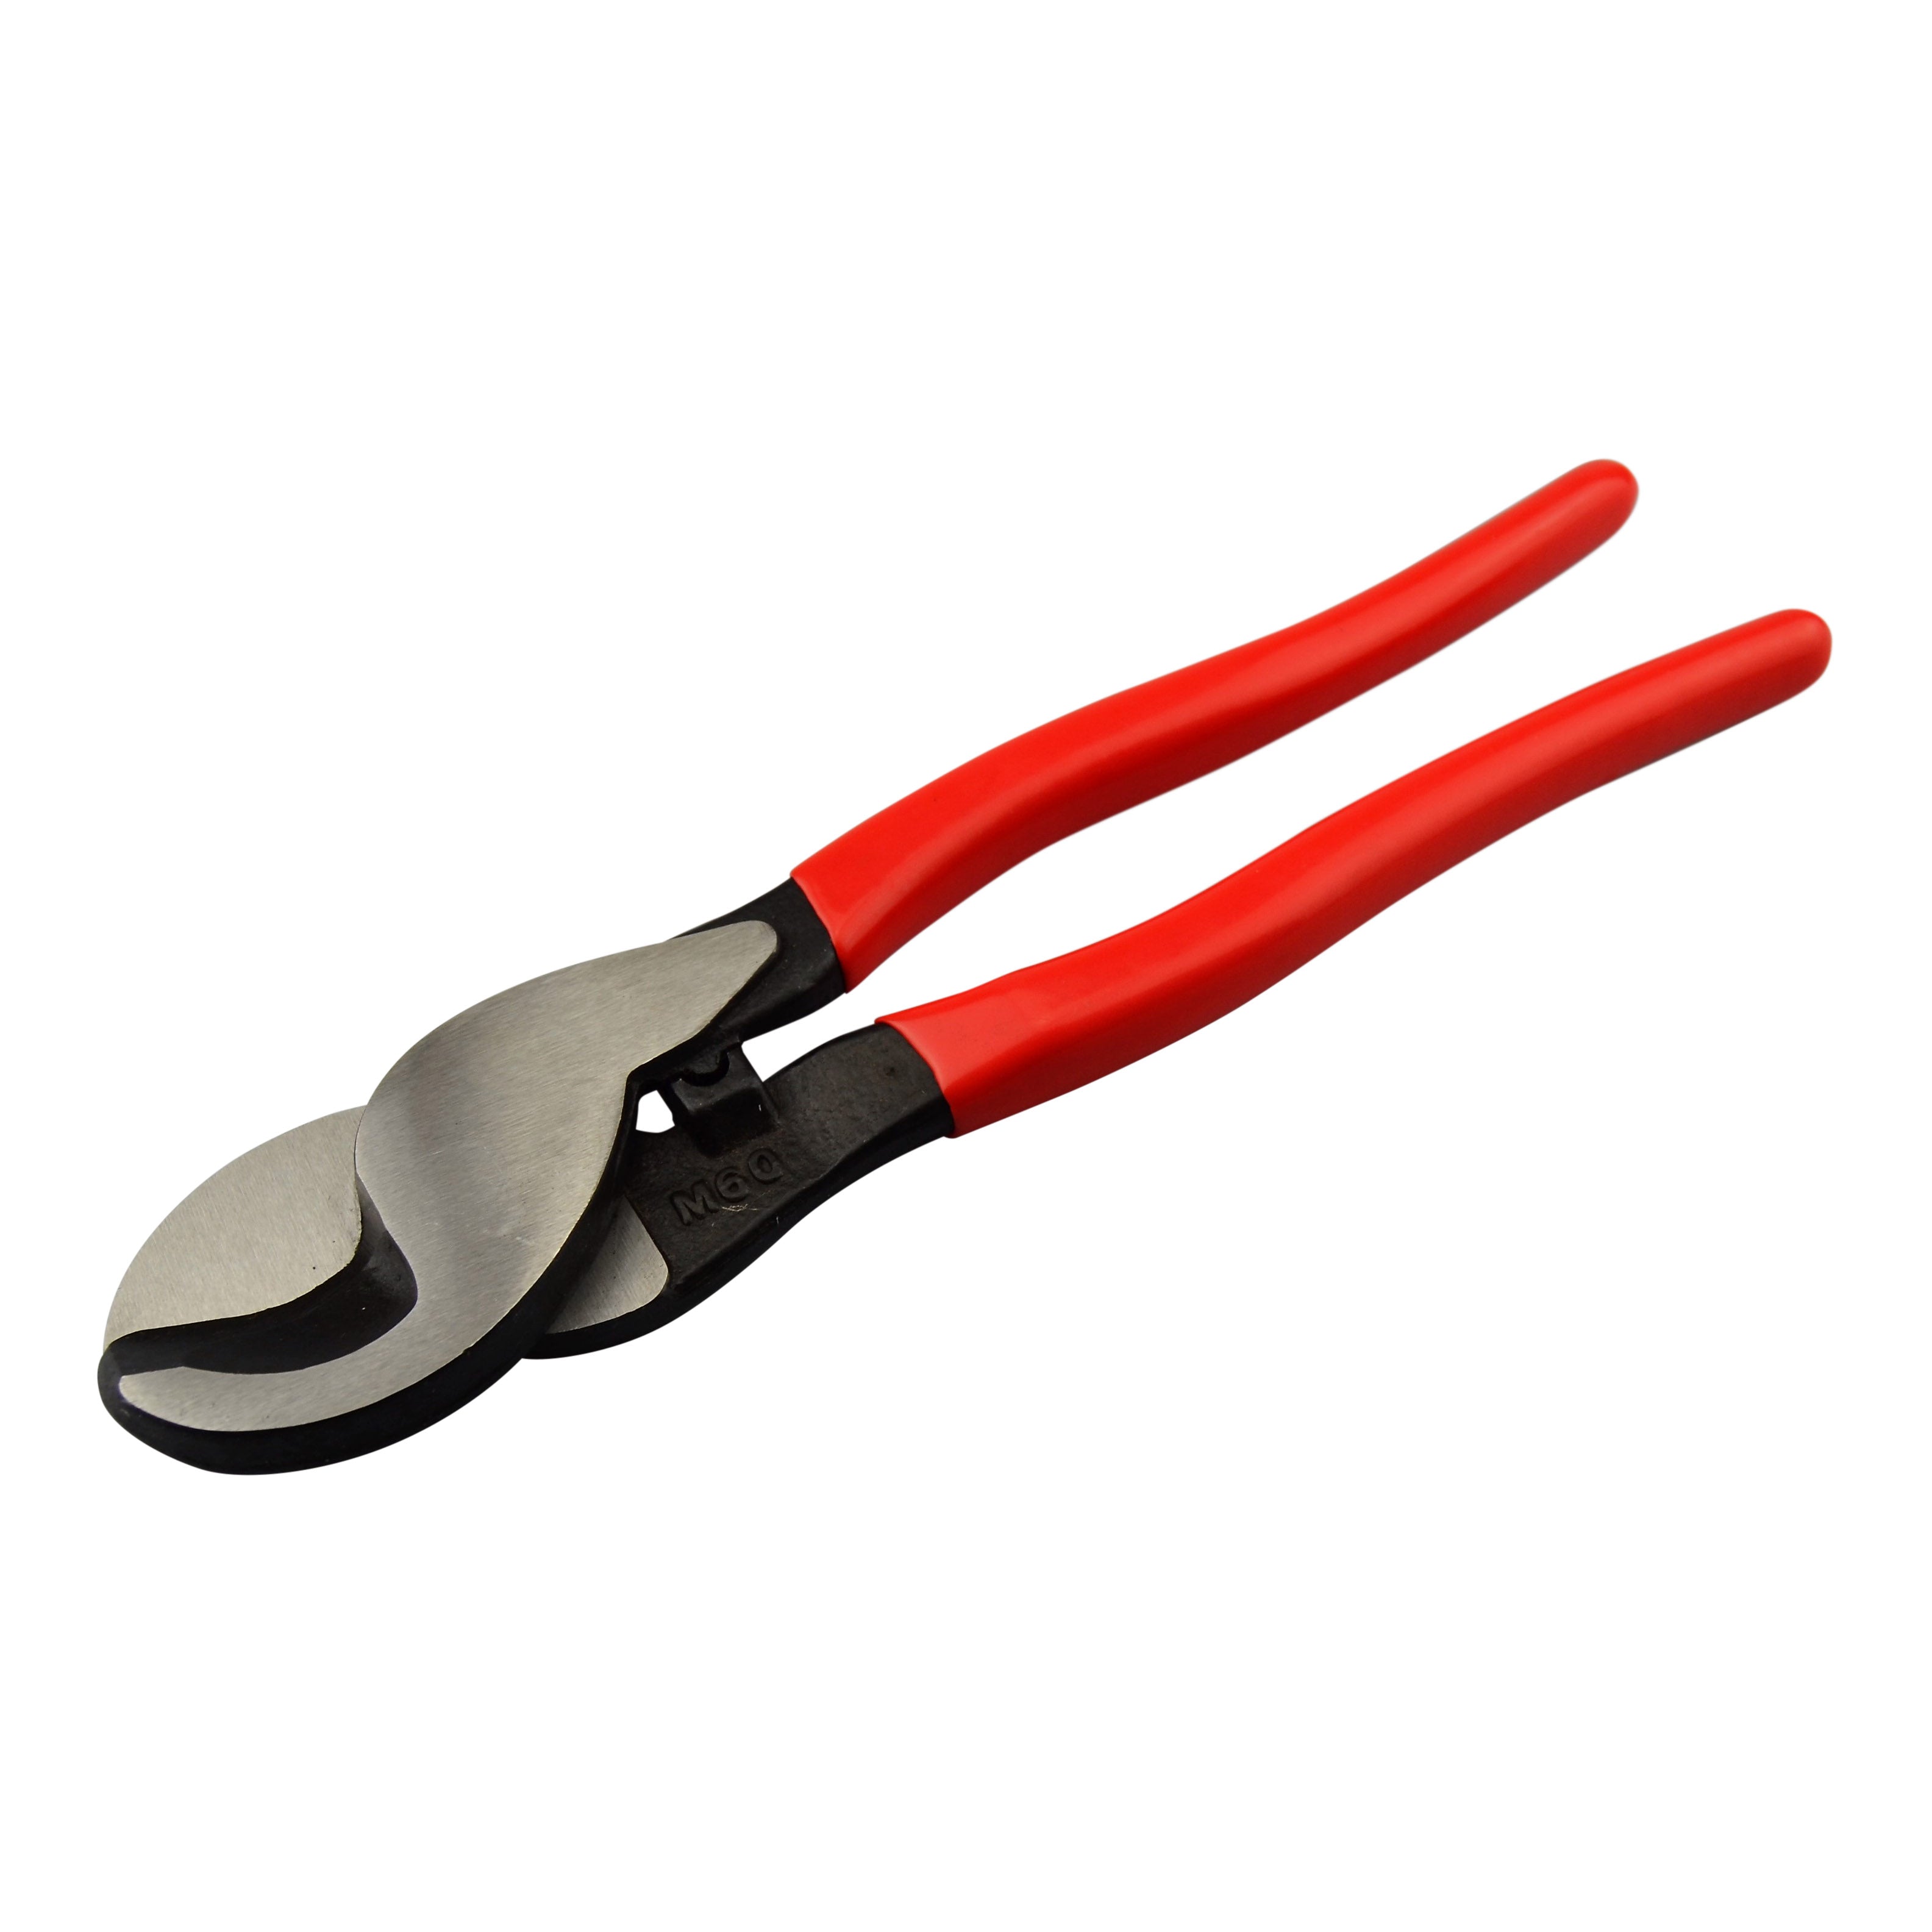 Cable Cutter for Cables up to 60mm²